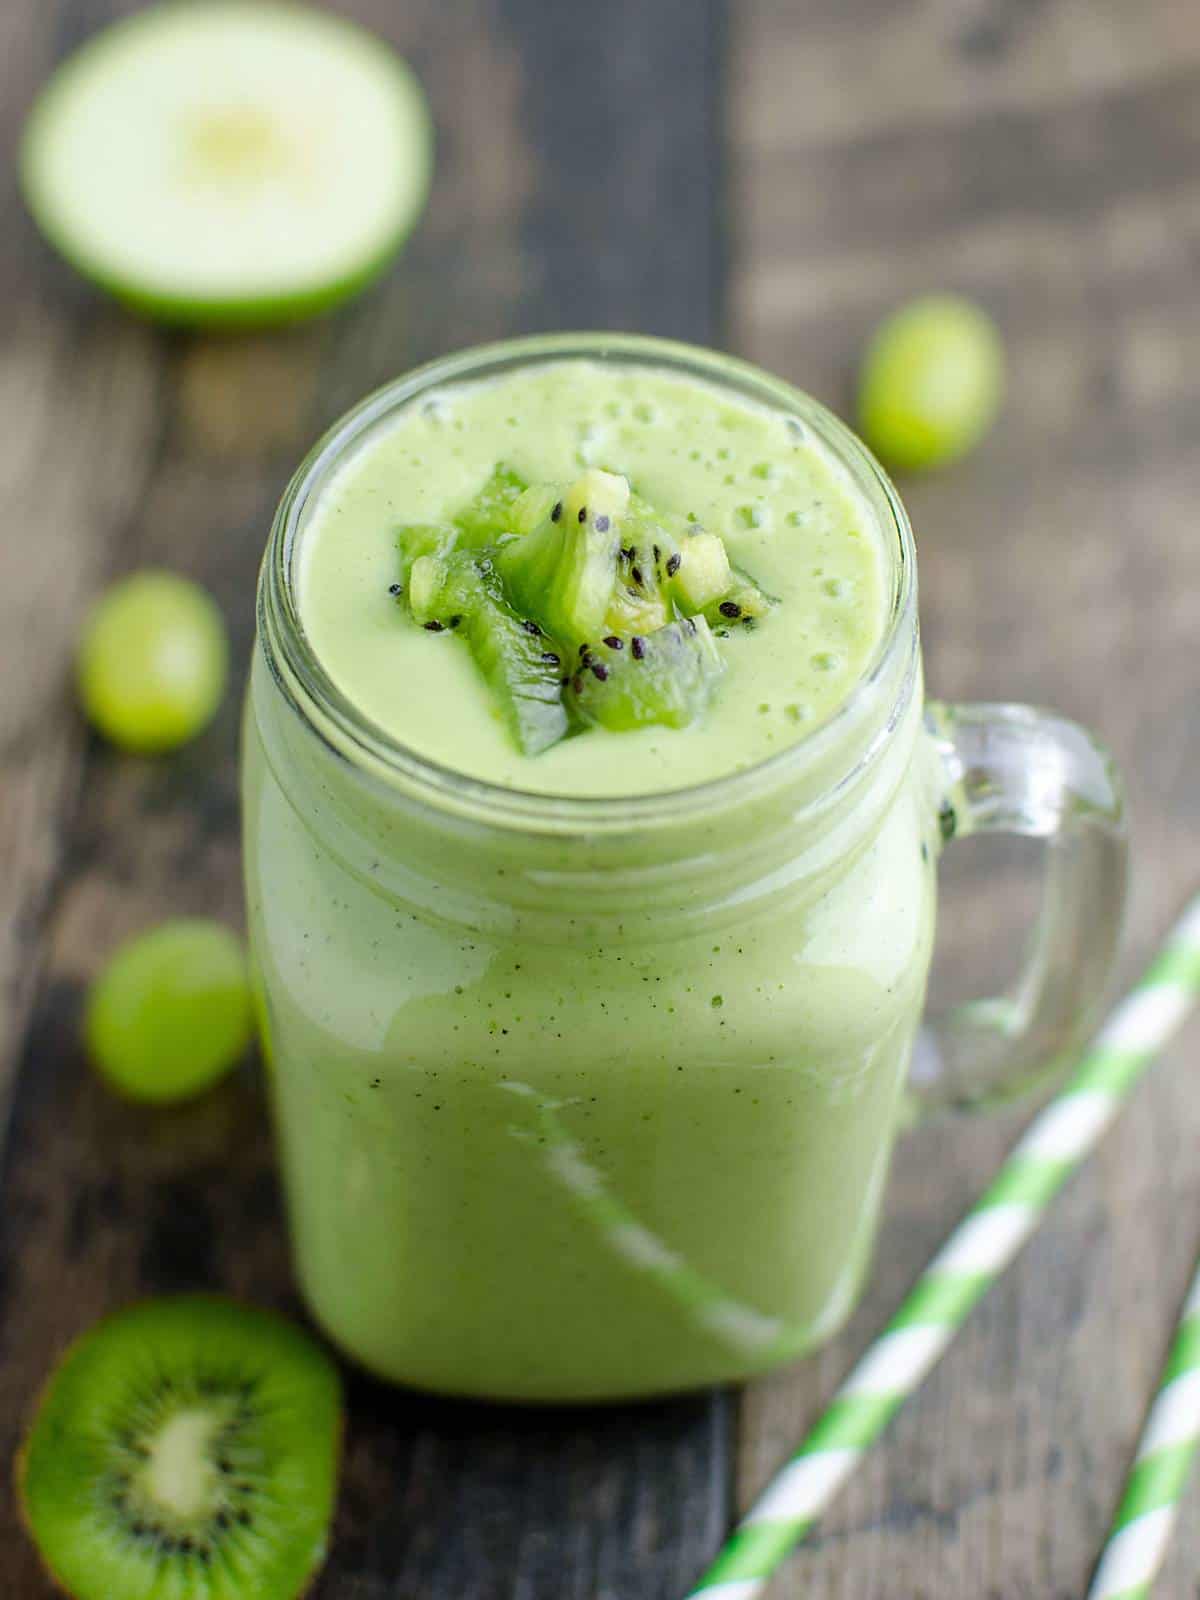 glass jar mug filled with a green smoothie made of fruit and vegetables garnished with chunks of kiwi on top.